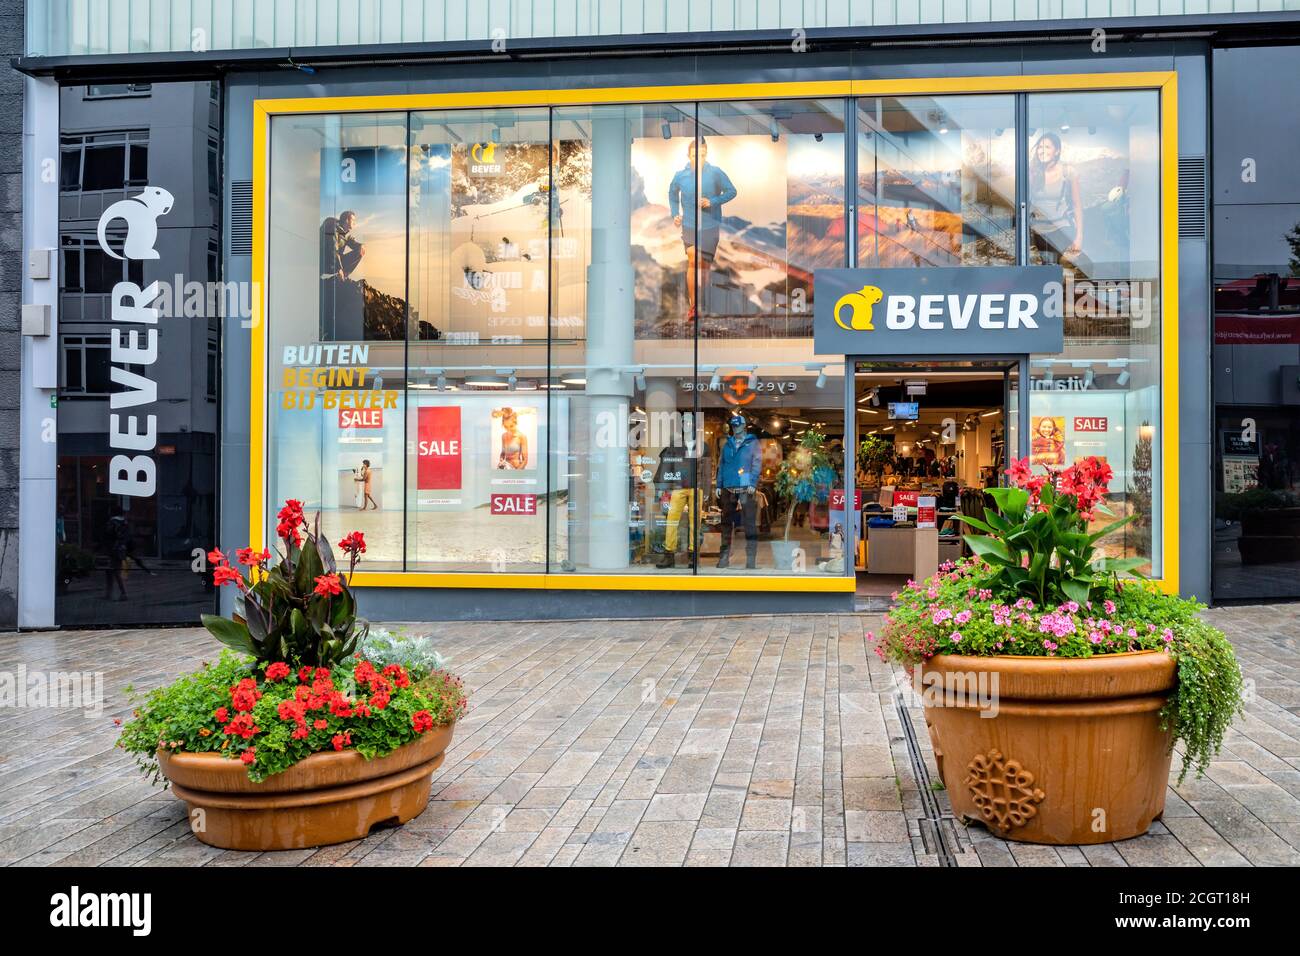 Bever outdoor store in Almere, The Stock Photo - Alamy